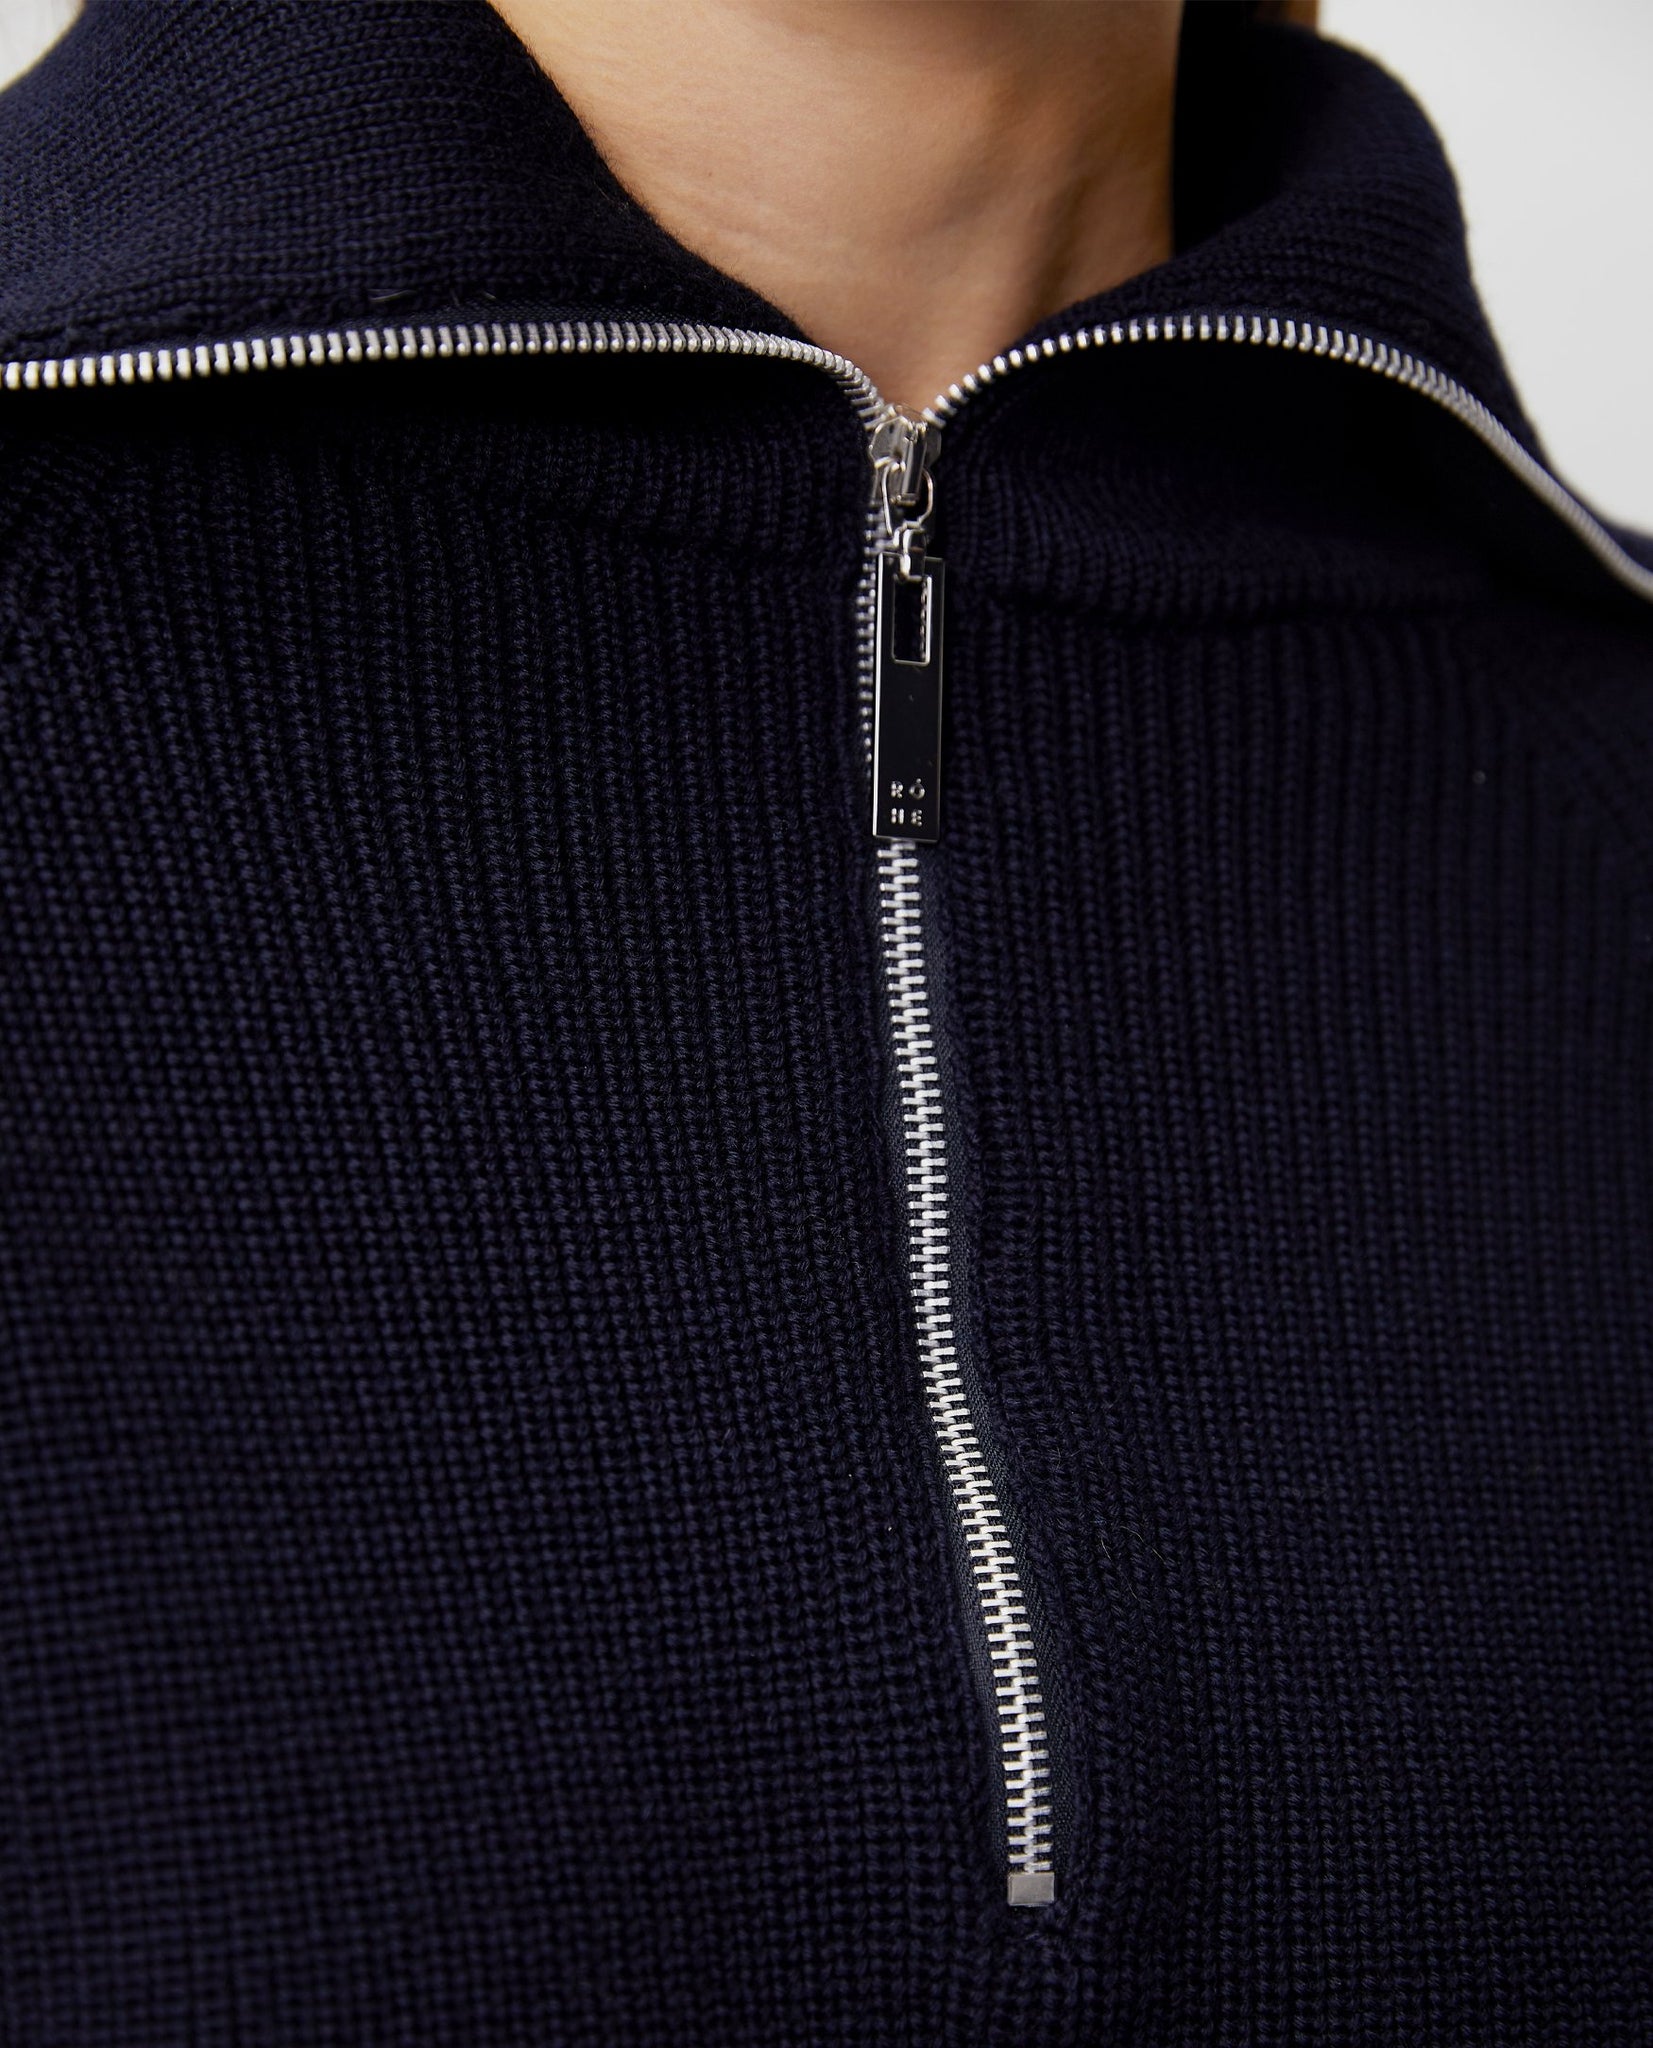 CARRY PULLOVER IN NAVY BY RÓHE